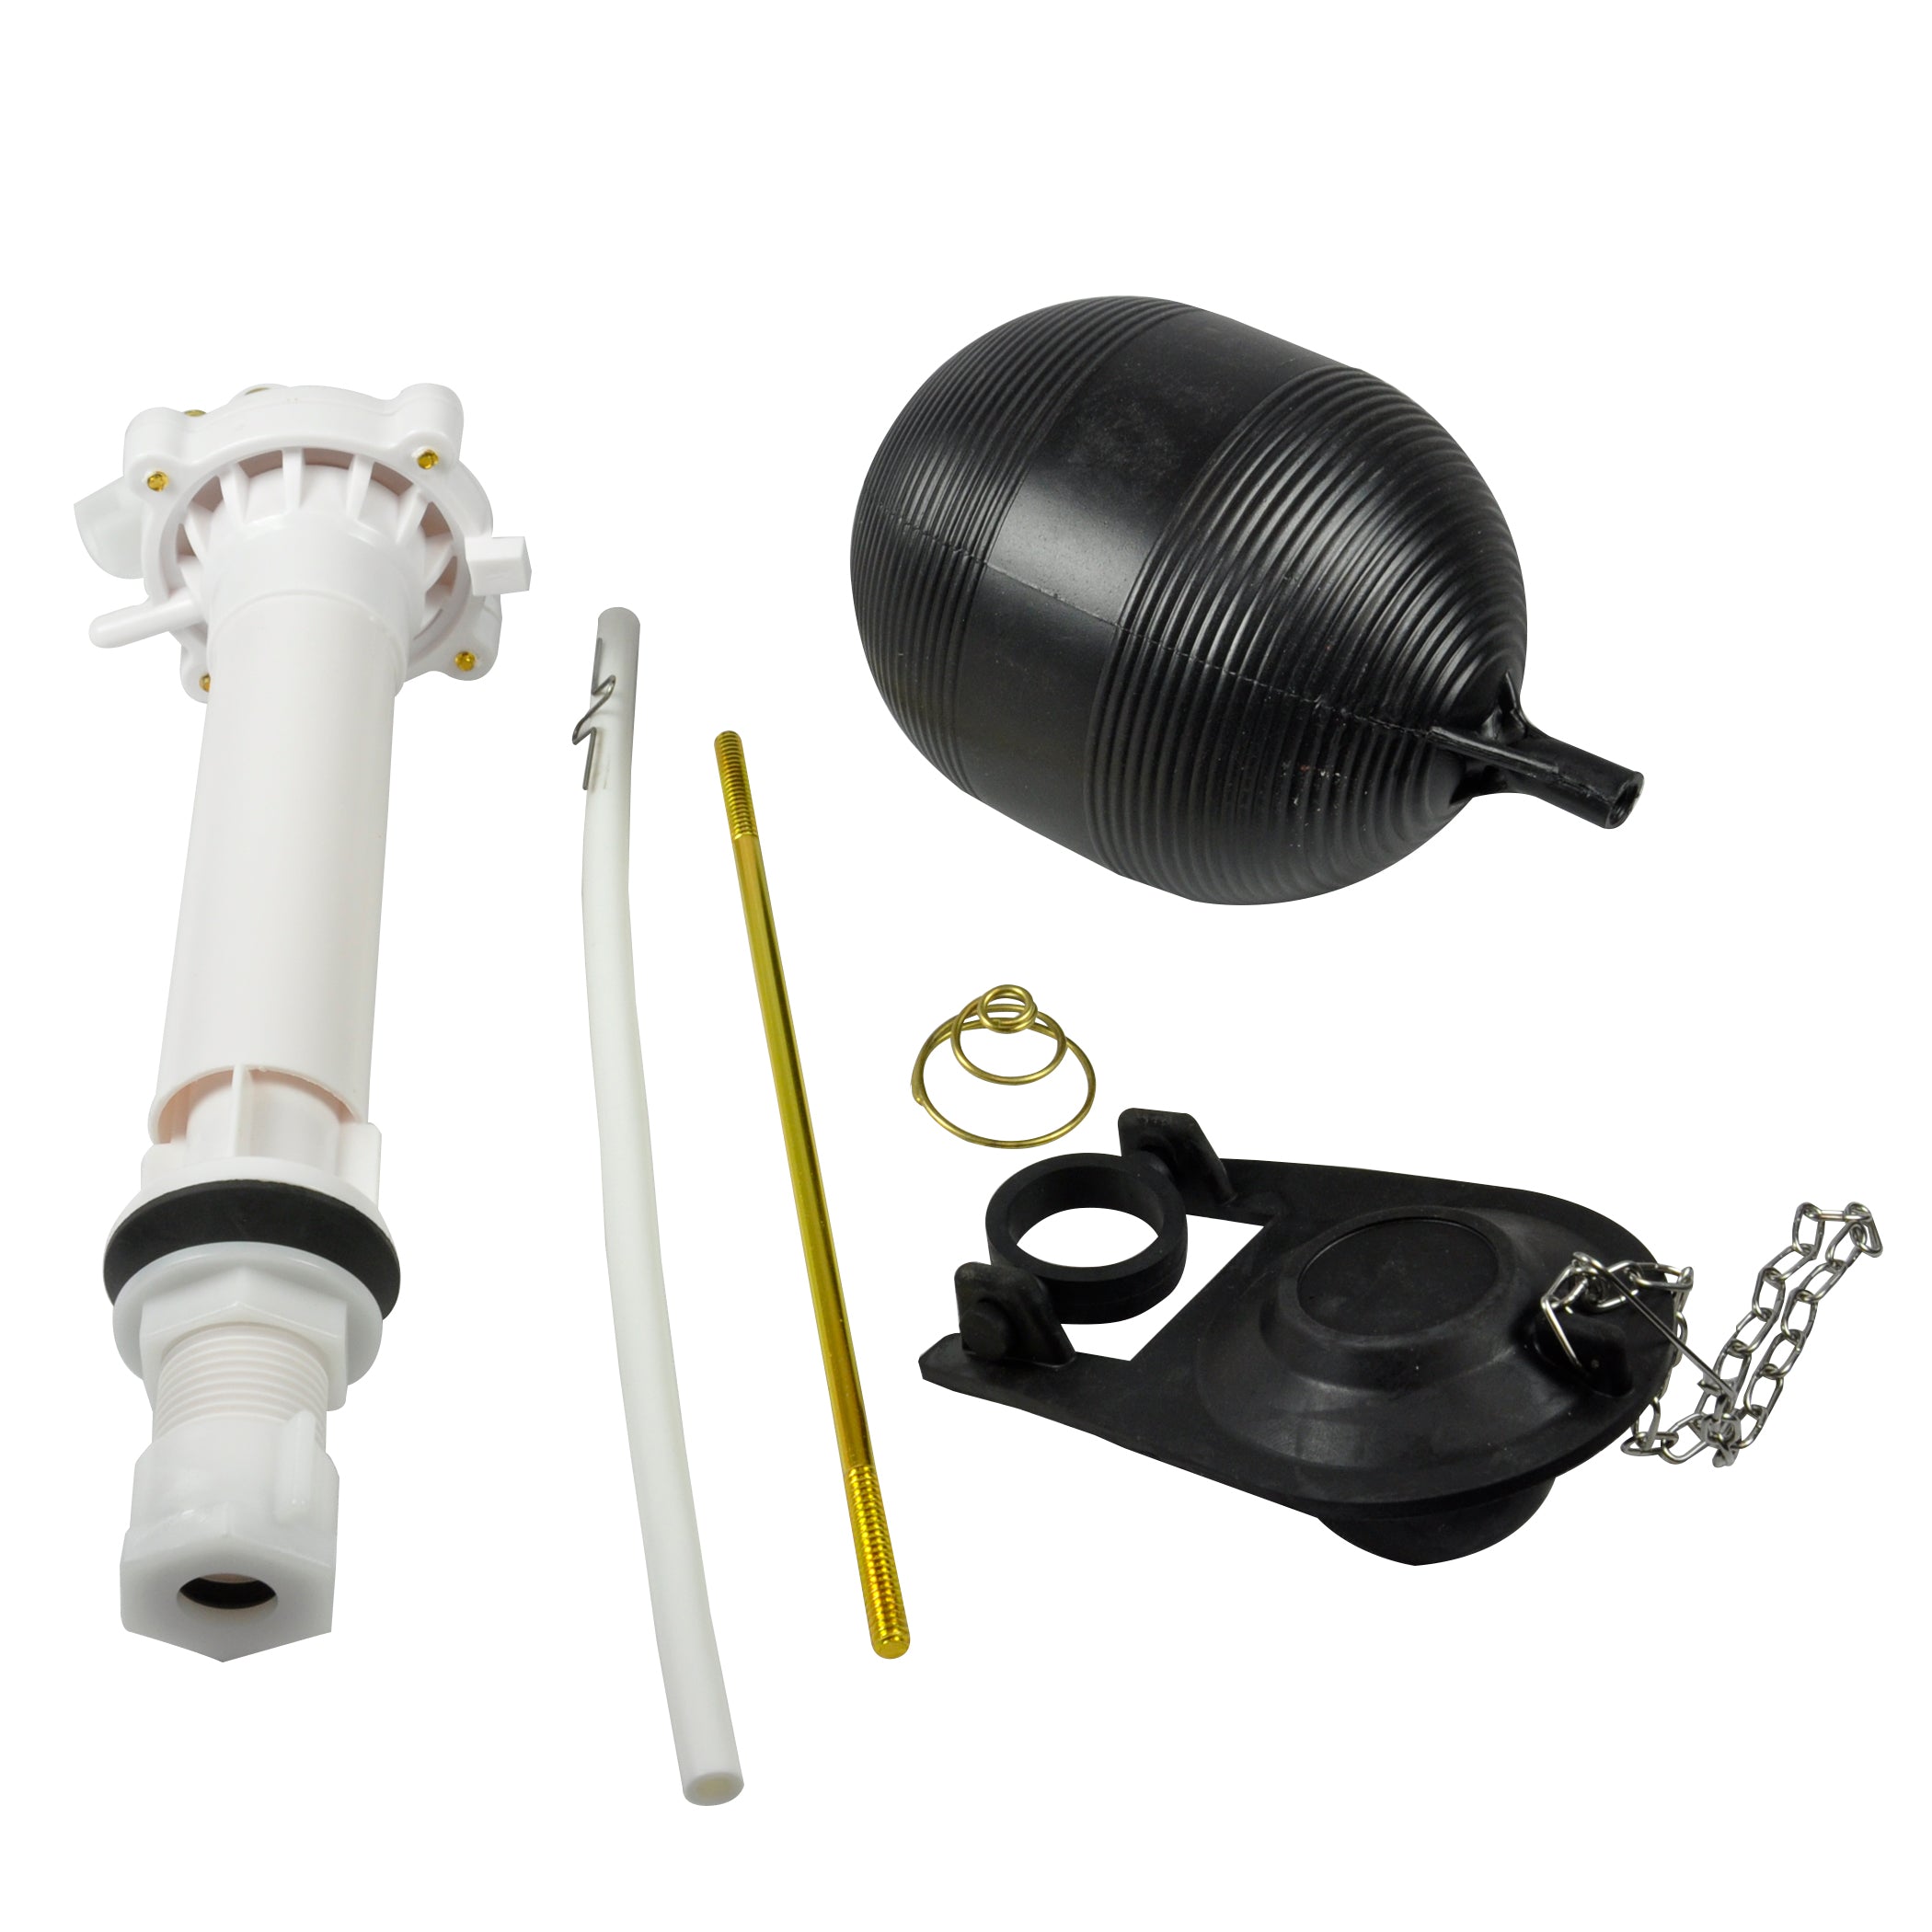 Toilet Repair Kit Universal Tanks Fill Valve Flapper Float Replacements-Toilet Parts & Attachments-AULEY